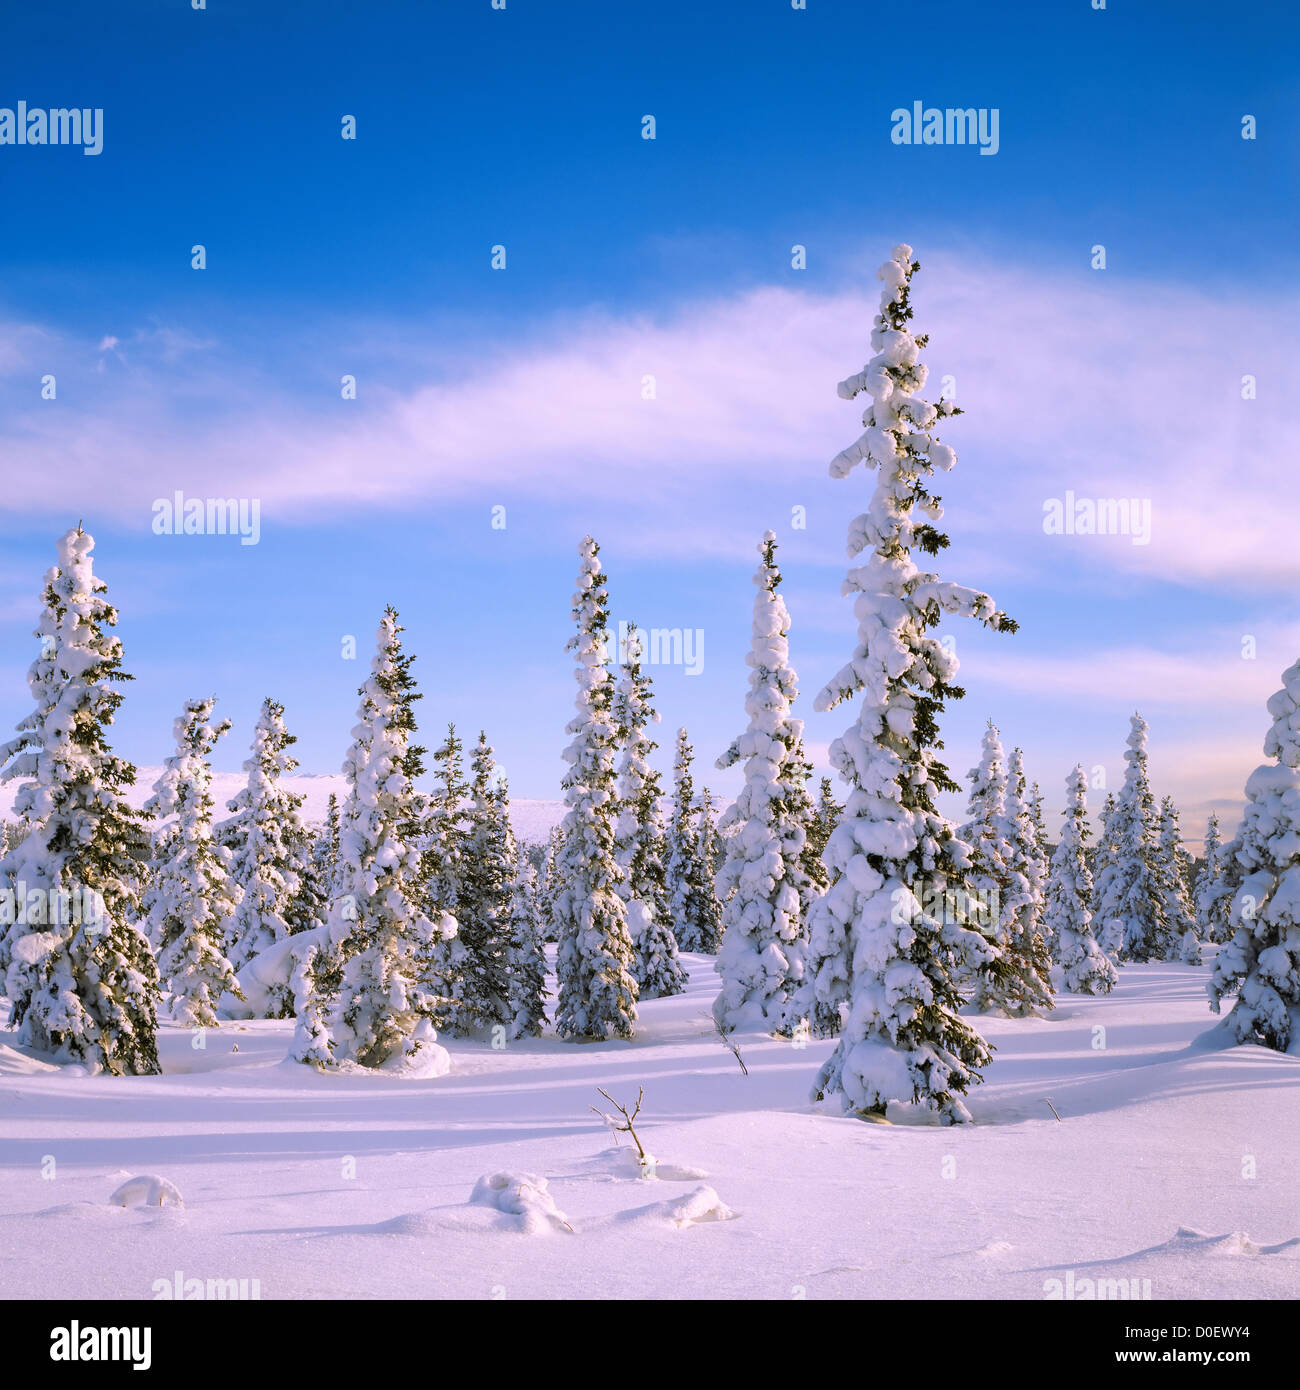 Winter Snow and Rime Ice Covering White Spruce Stock Photo